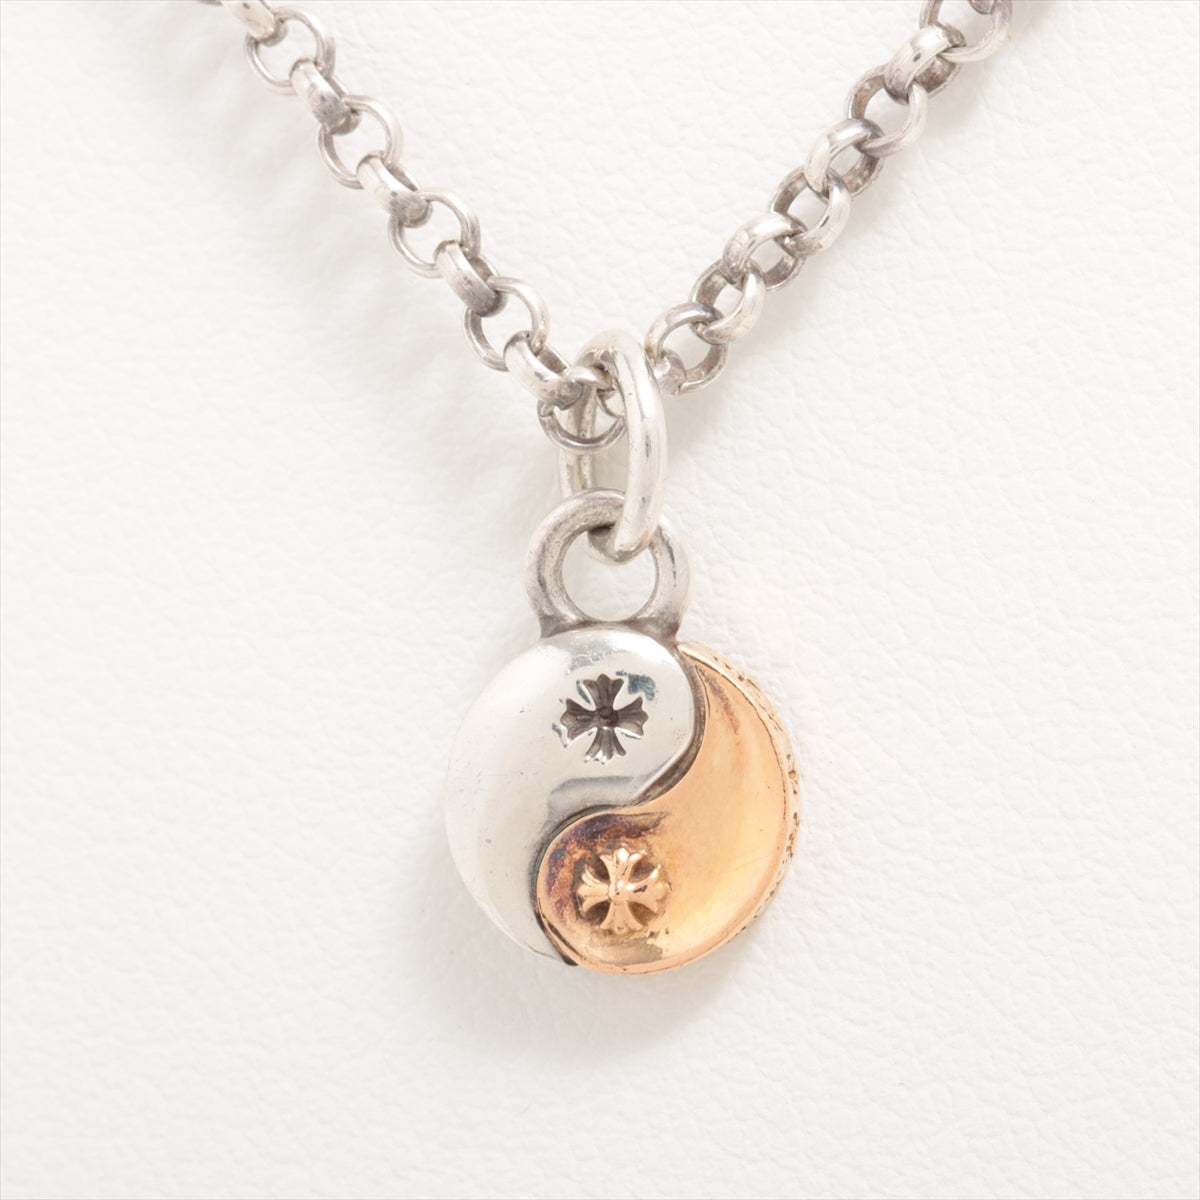 Chrome Hearts Yin Yang Necklace 22K×925 6.7g With invoice Roll Chain 16 Inches